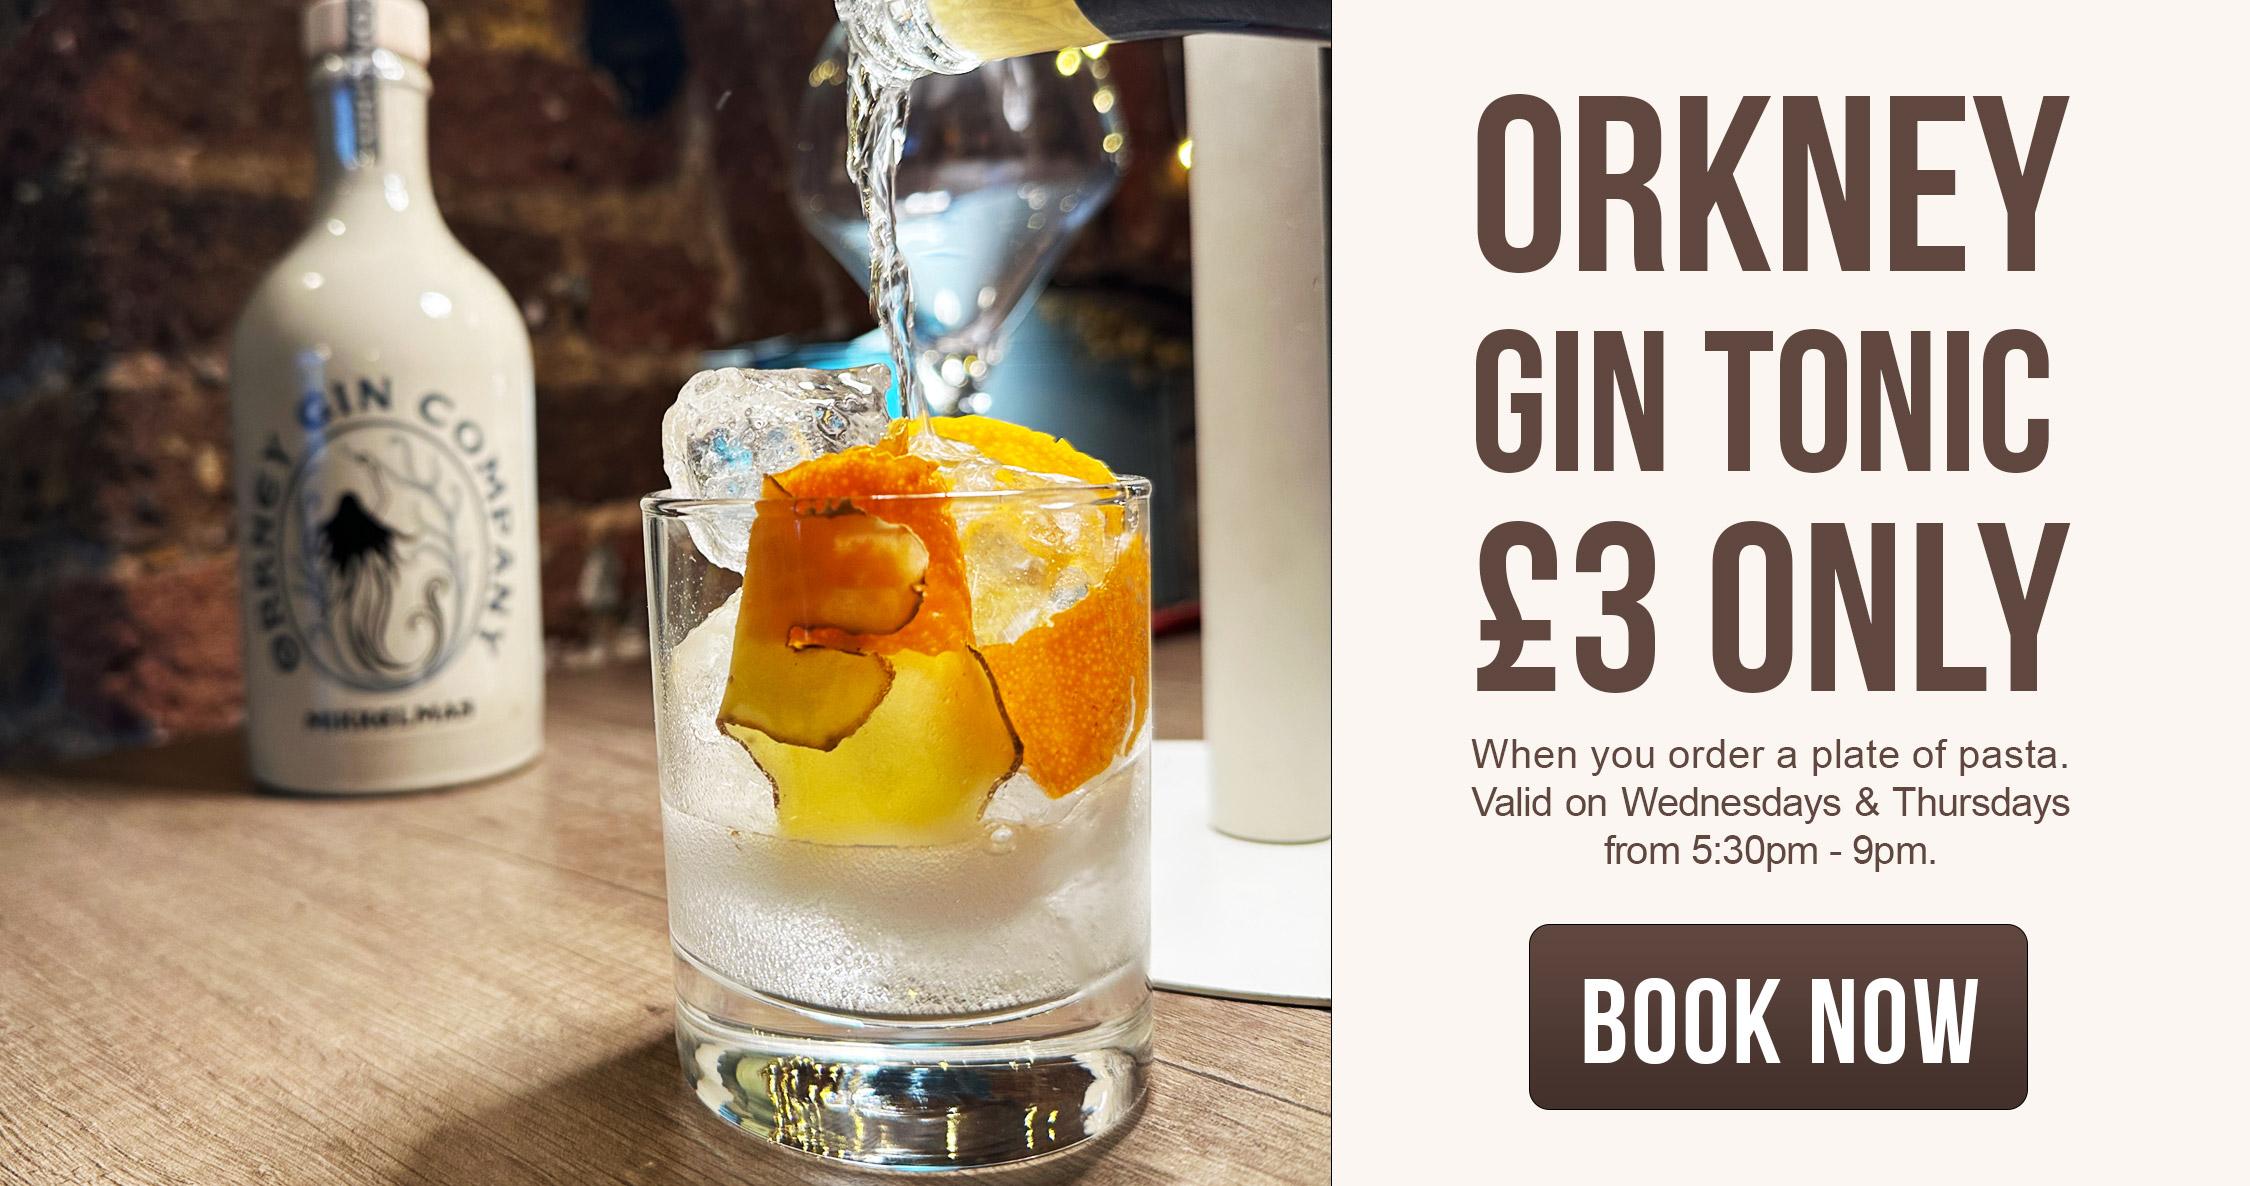 PerBacco Orkney Gin Tonic Promotion